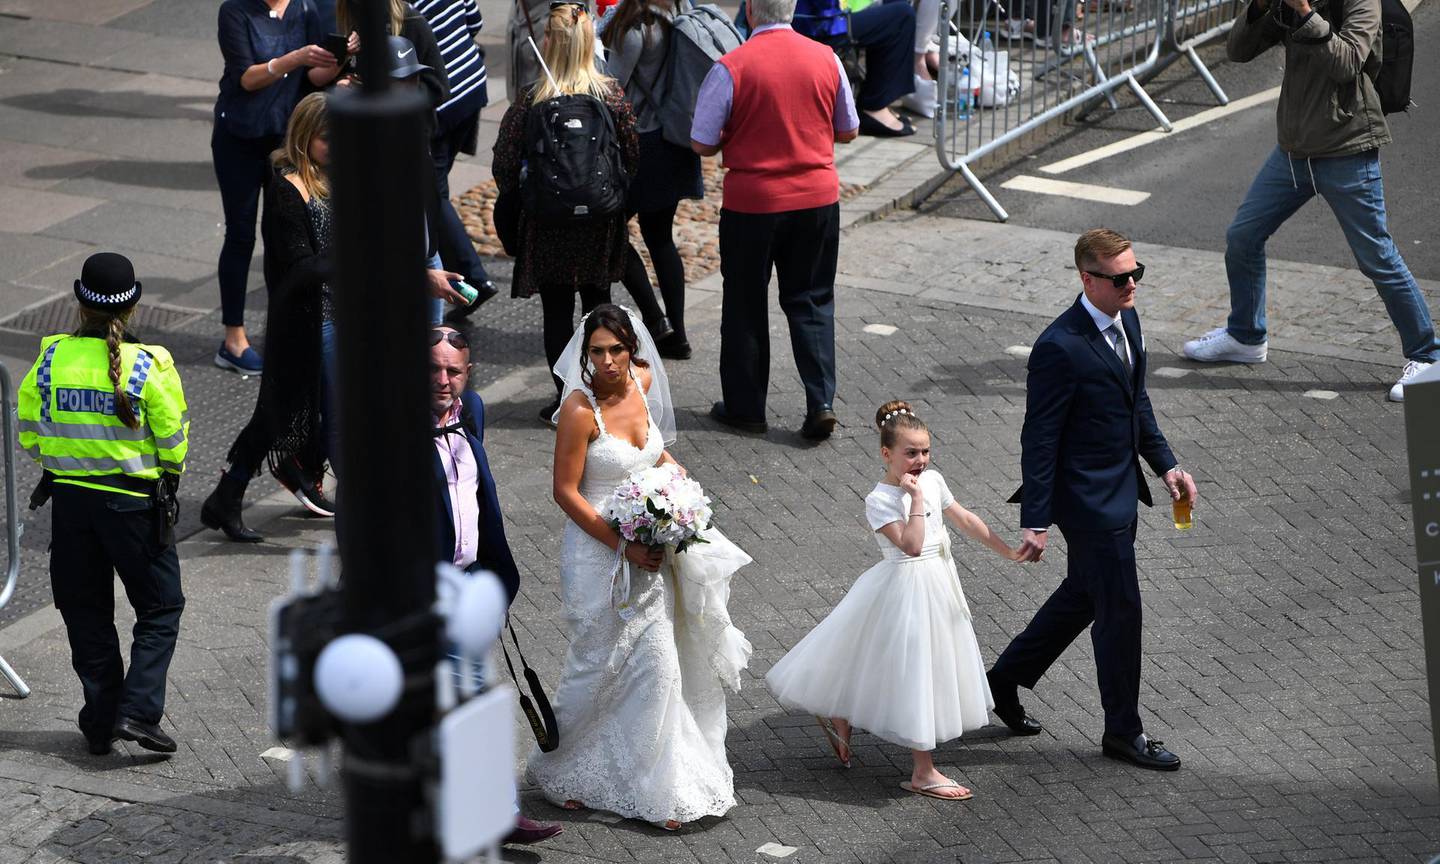 Bride Vicky Hallam walks through Windsor after her marriage in the Guildhall, ahead of the wedding between Britain’s Prince Harry and Meghan Markle, in Windsor, Britain May 18, 2018. REUTERS/Dylan Martinez